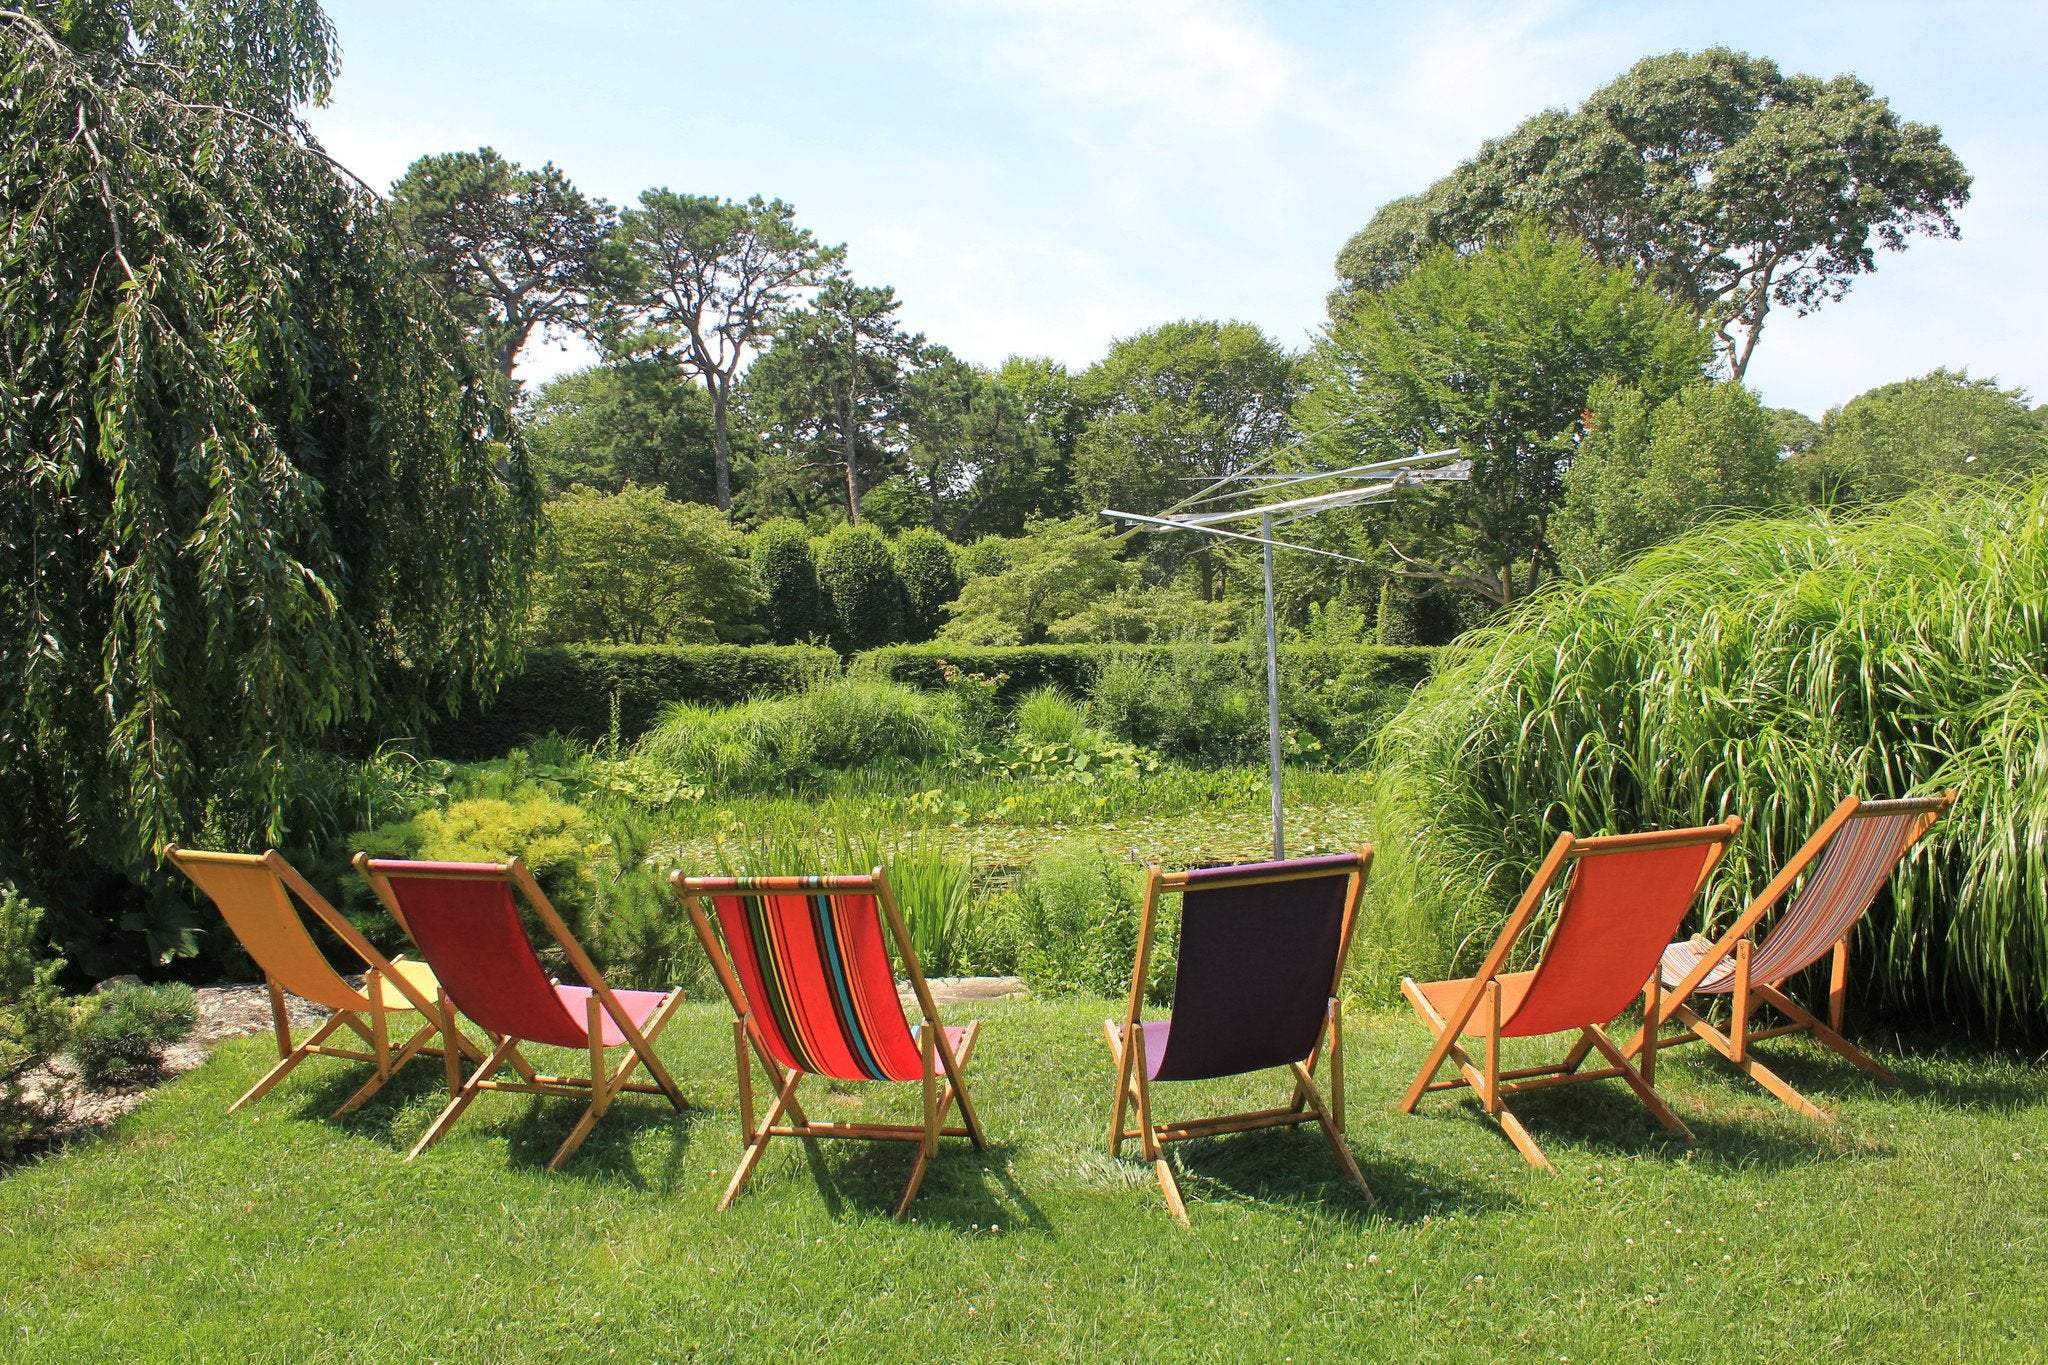 Sunbrella Chairs:  The Stalwarts of LongHouse Reserve